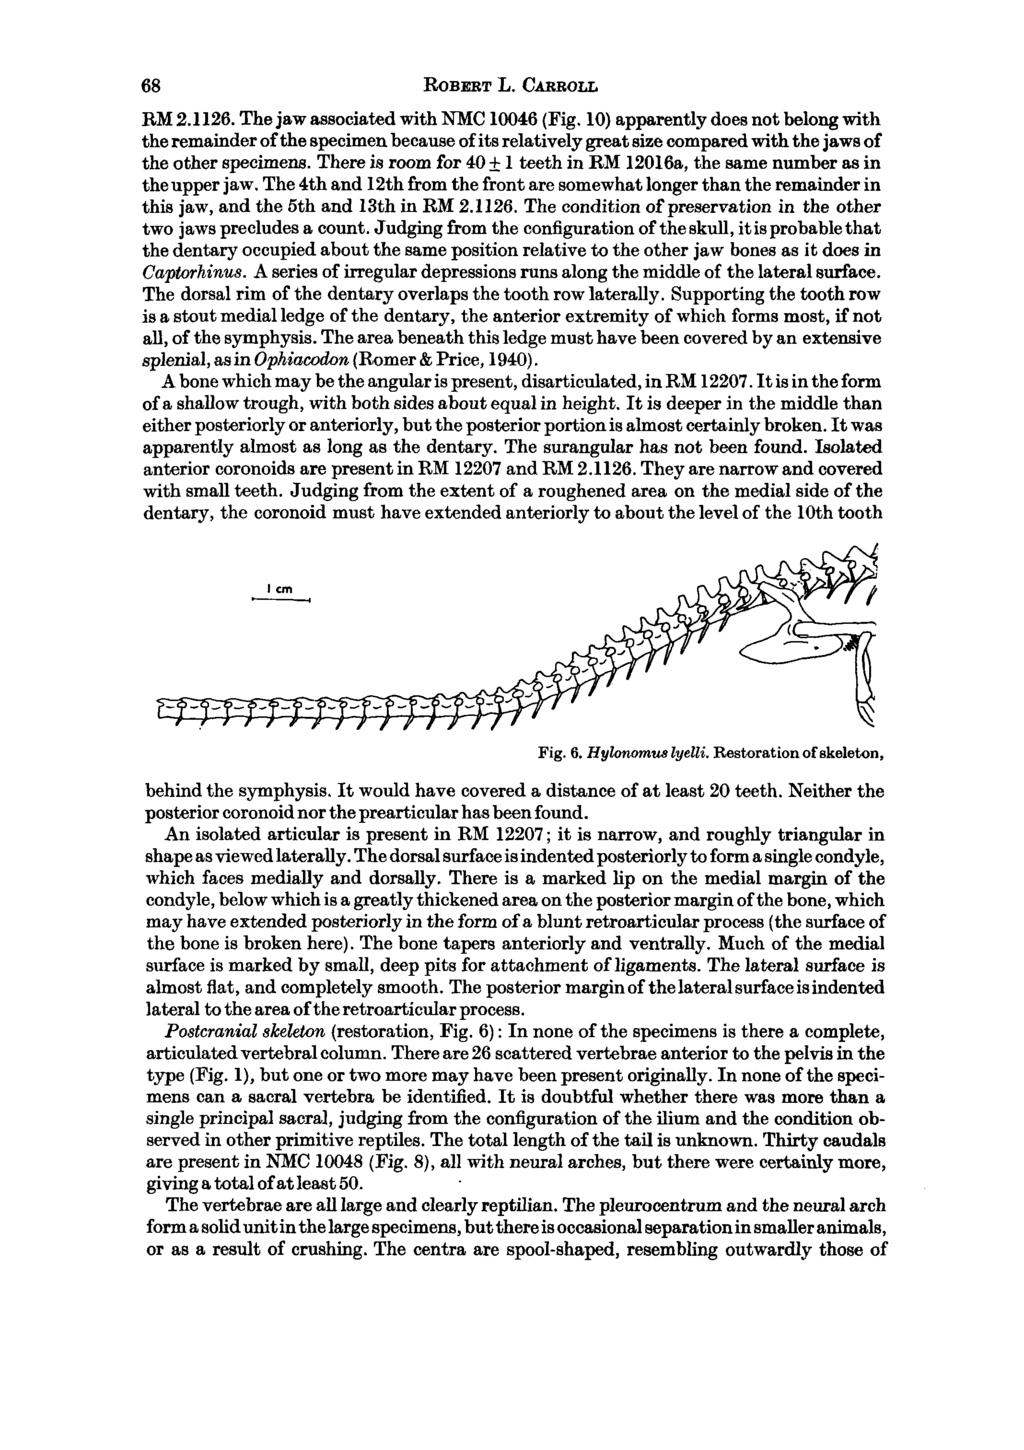 68 ROBERT L. CARROLL RM 2.1126. The jaw associated with NMC 10046 (Fig.